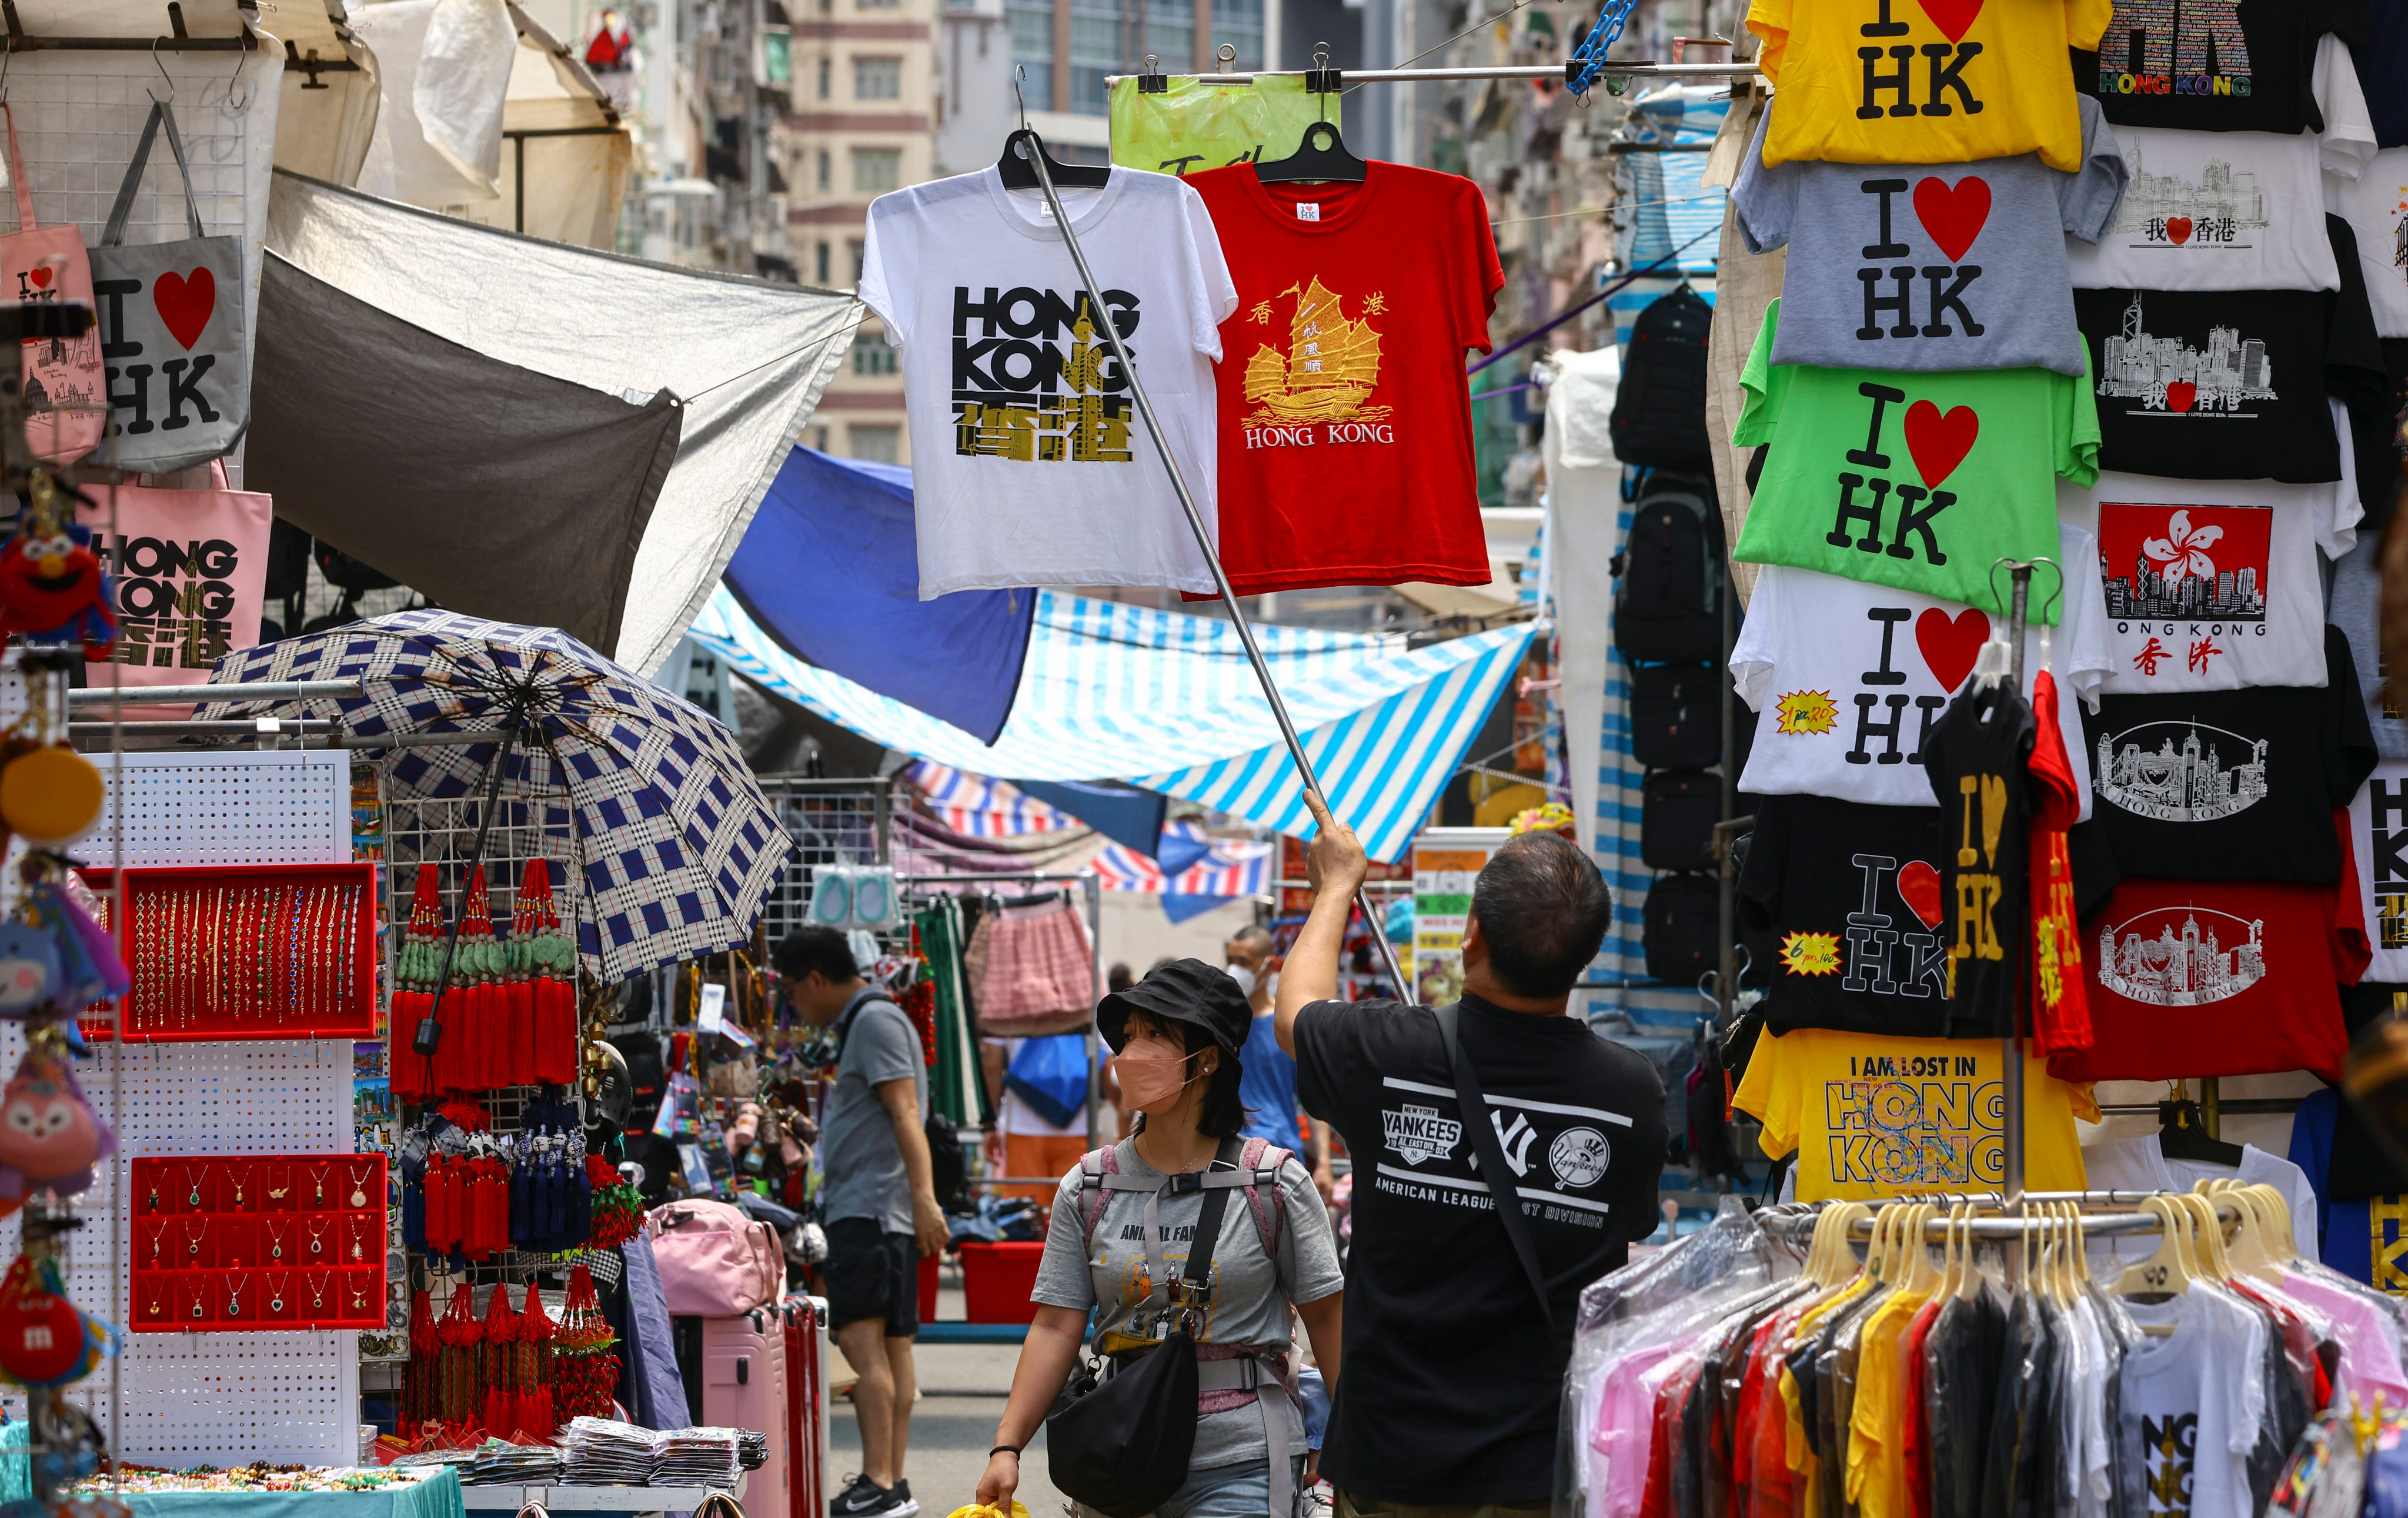 Hong Kong’s economy is making a strong recovery, according to the IMF. Photo: Dickson Lee